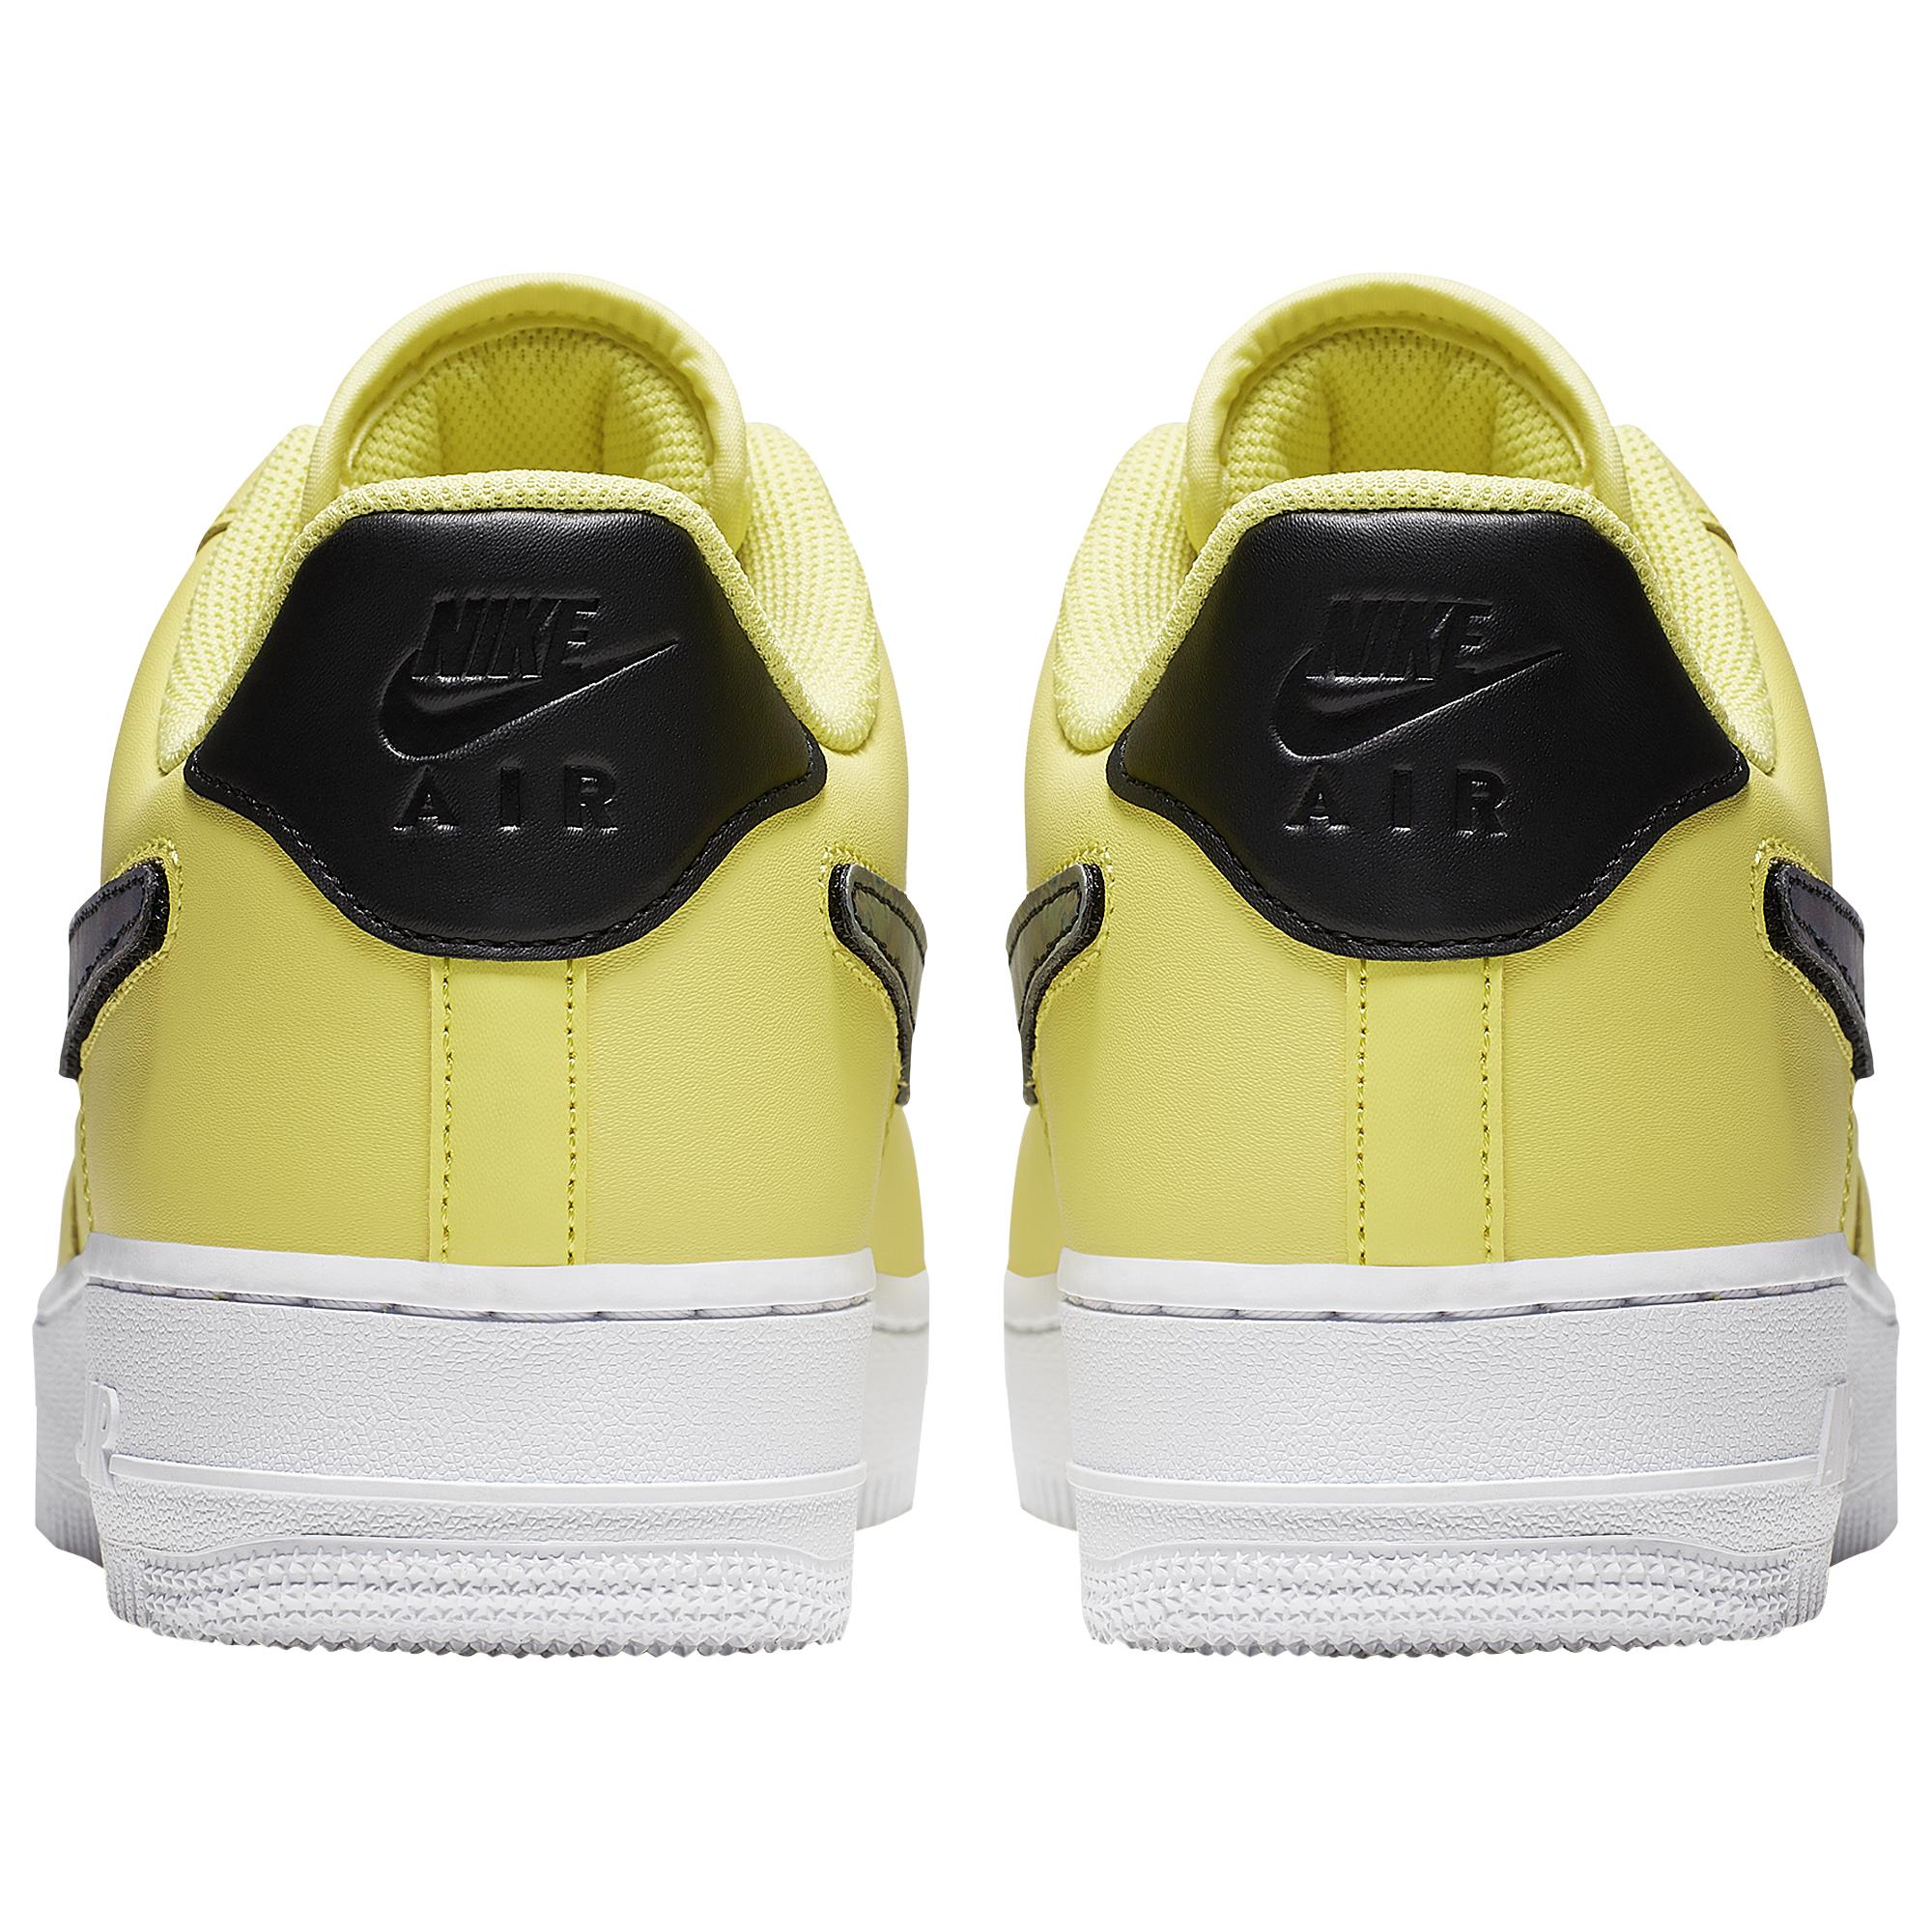 Nike Synthetic Air Force 1 Lv8 Sneakers in Yellow for Men - Save 42% - Lyst